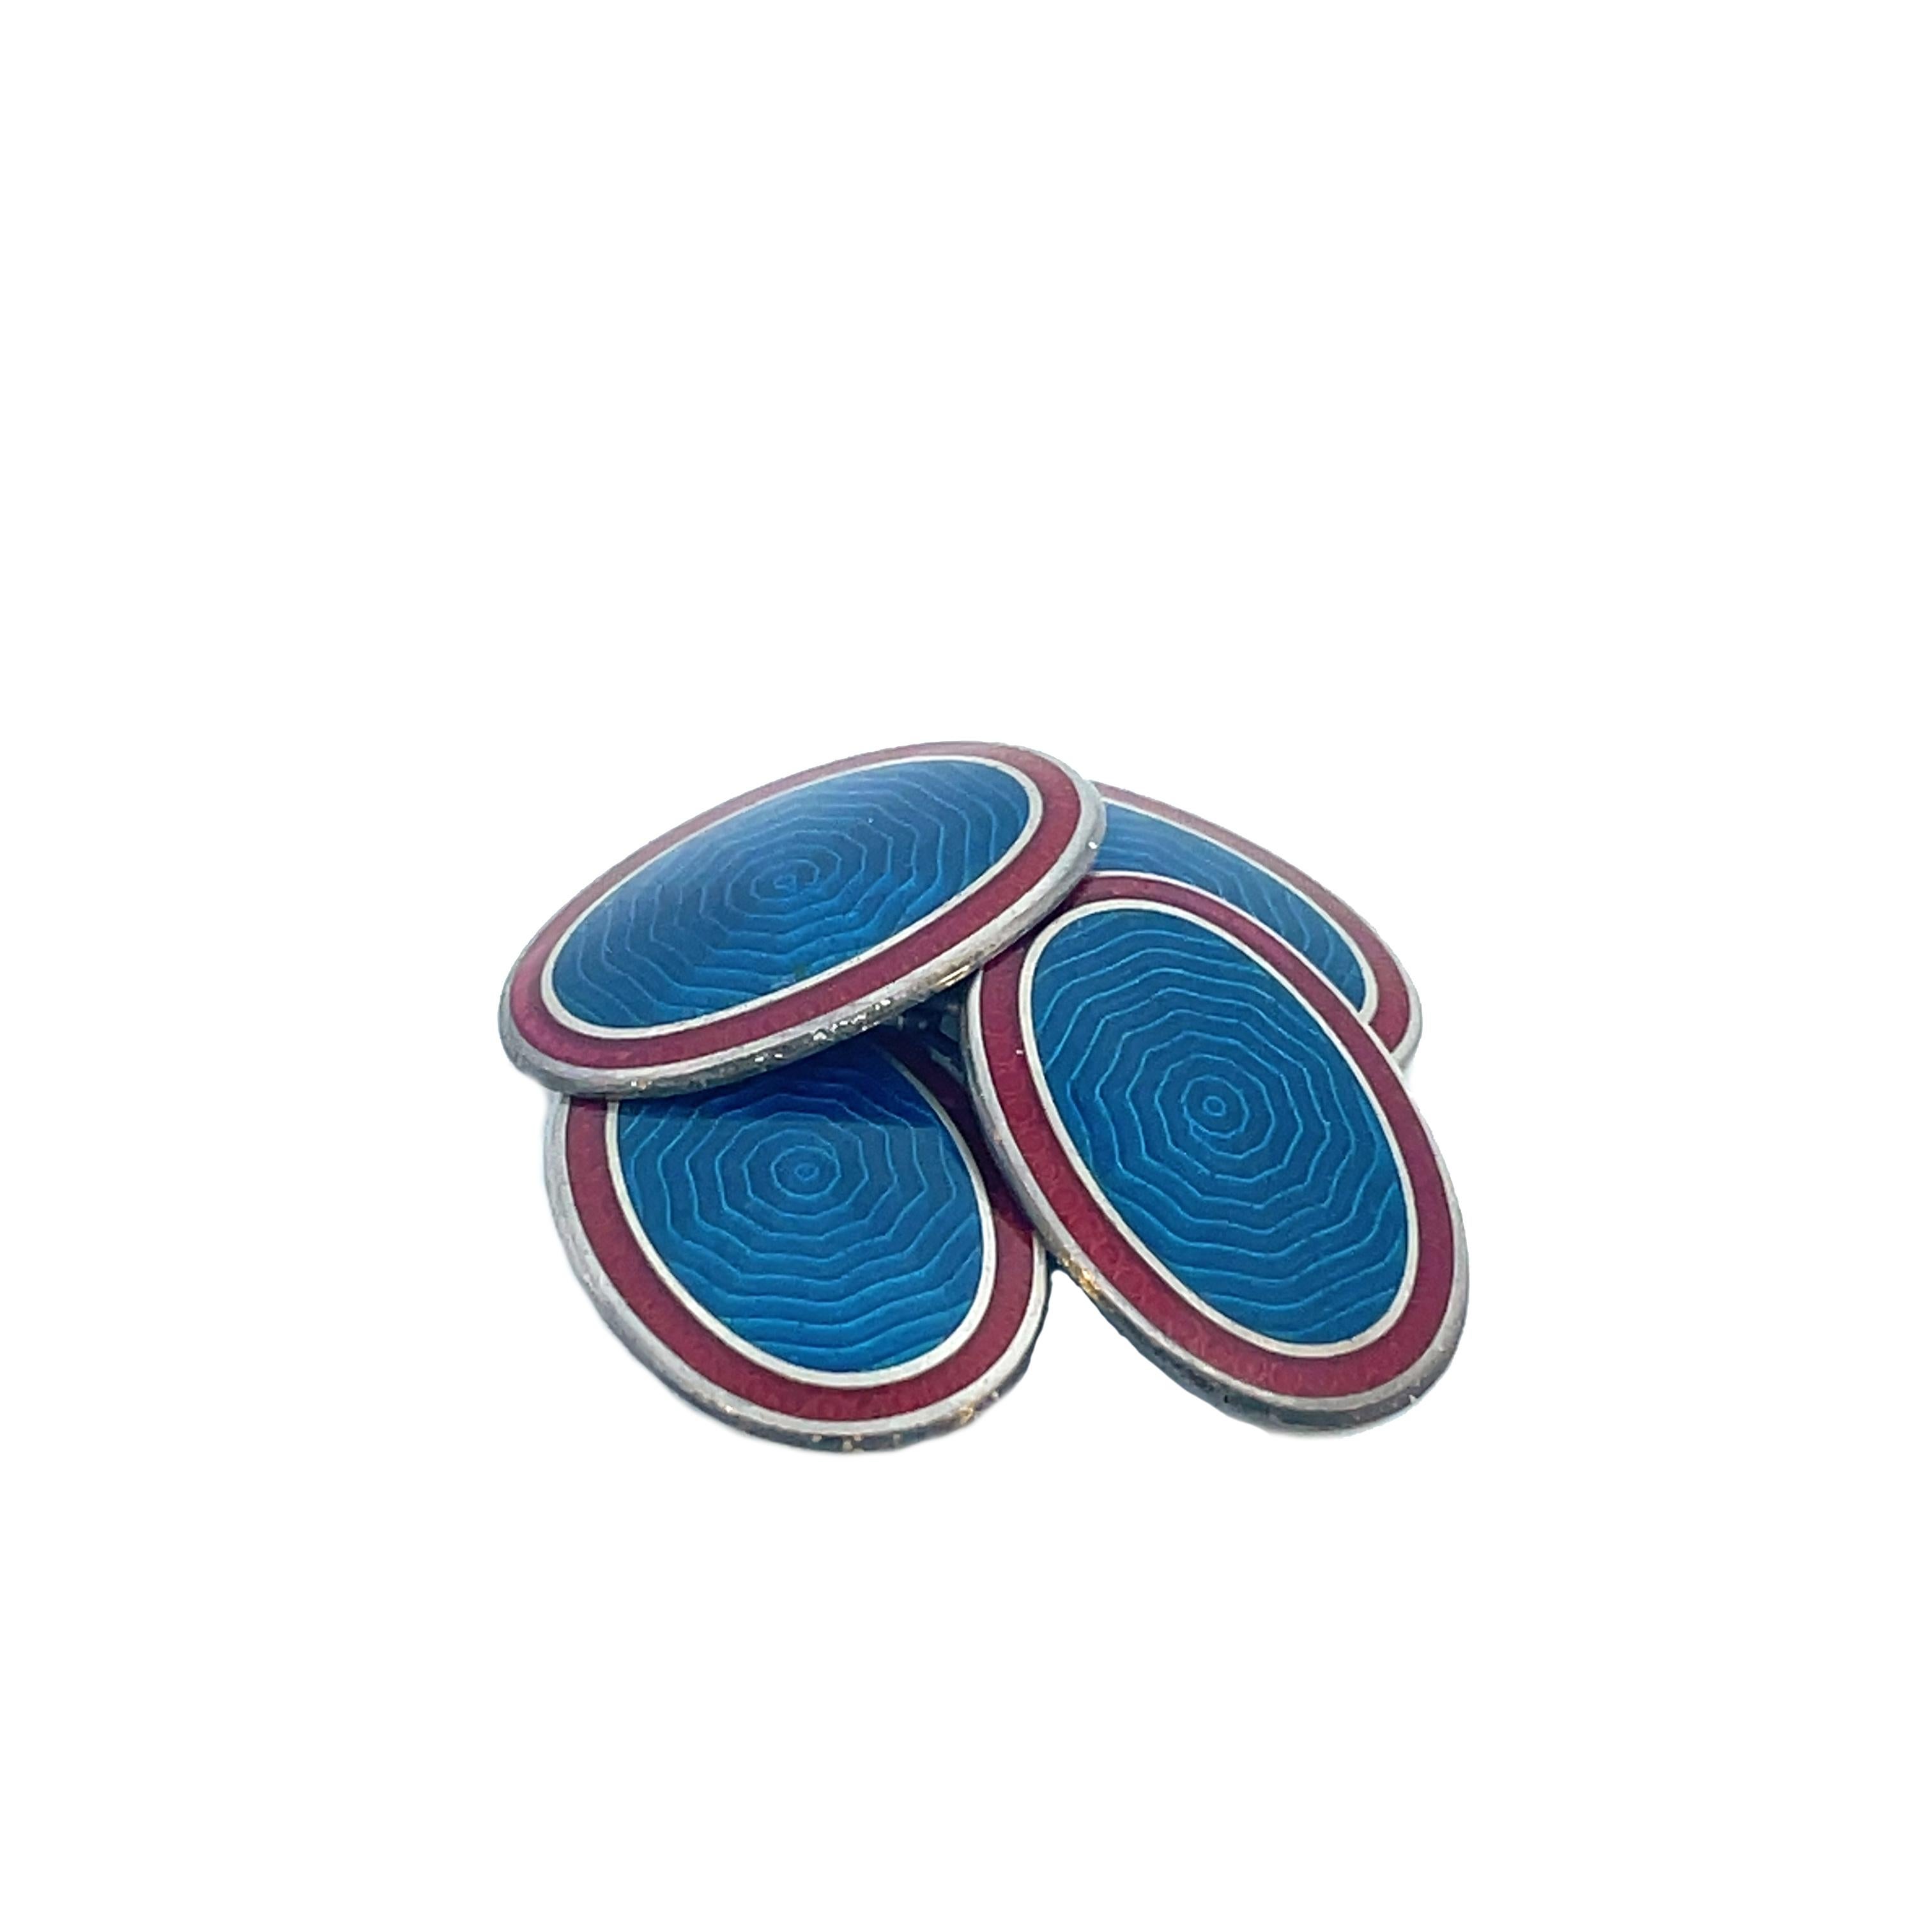 This is a smashing pair of Art Deco cufflinks crafted in sterling silver and vibrant red and blue enamel! These links are the perfect addition to any gentleman's wardrobe. Stunning steel grade blue at the center, with fanciful swirling lines, and a